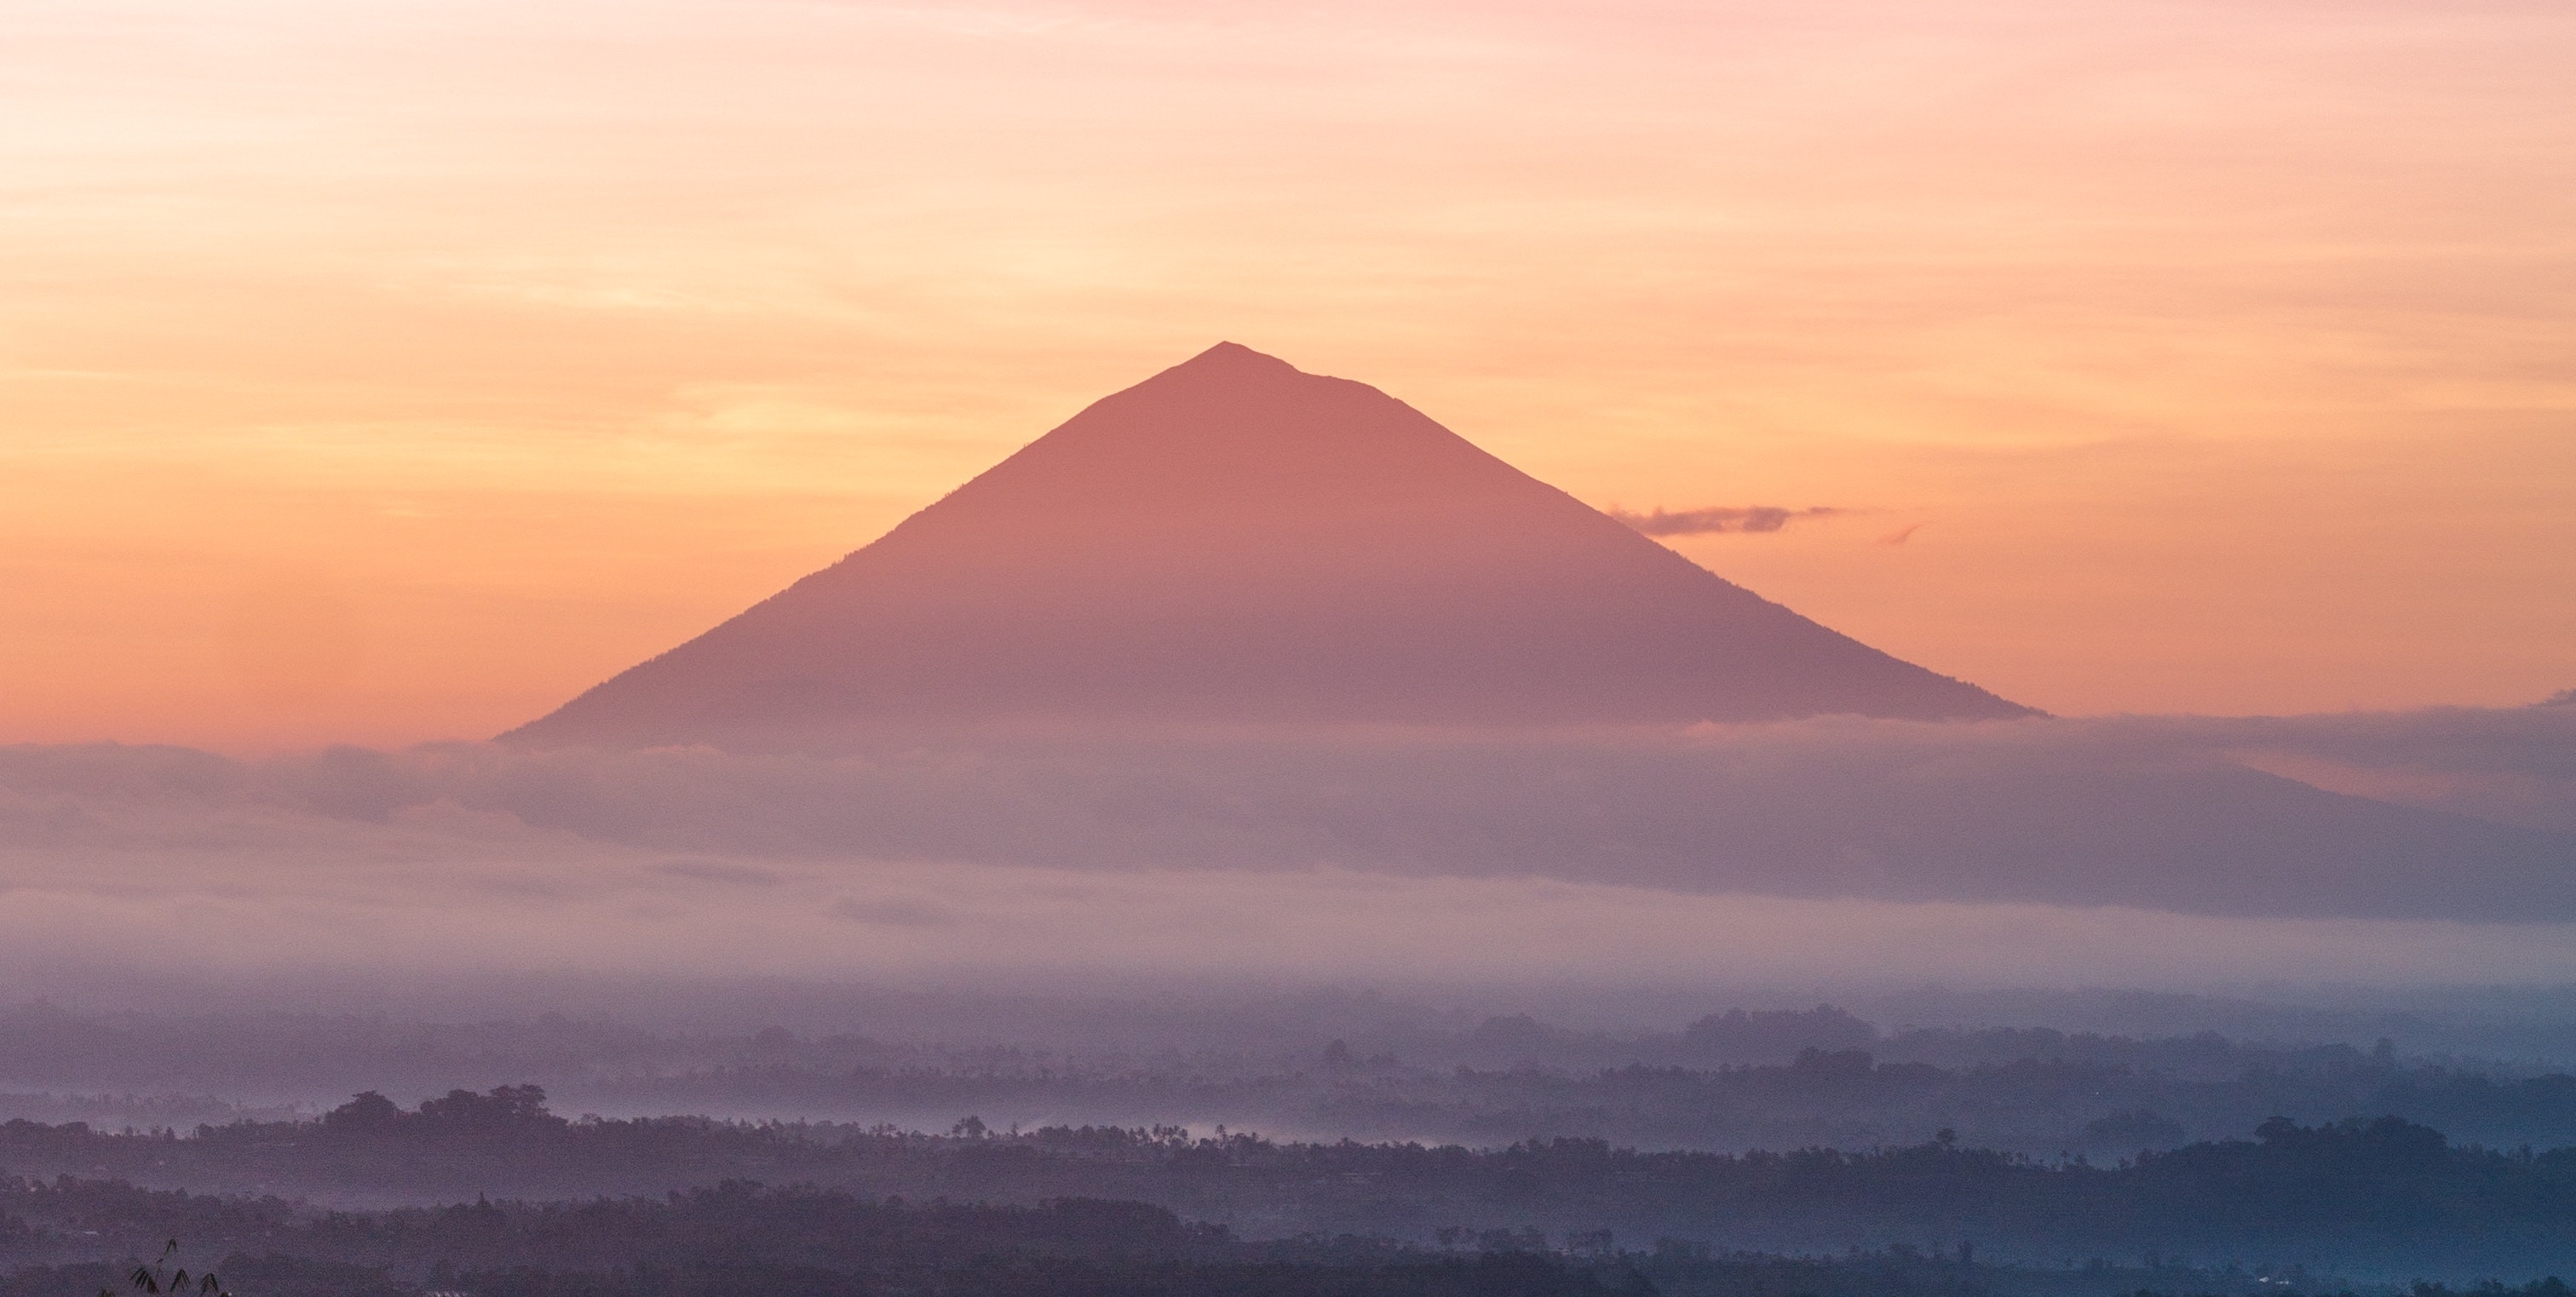 What Tourists Should Know About Bali’s Imminent  Volcano Eruption